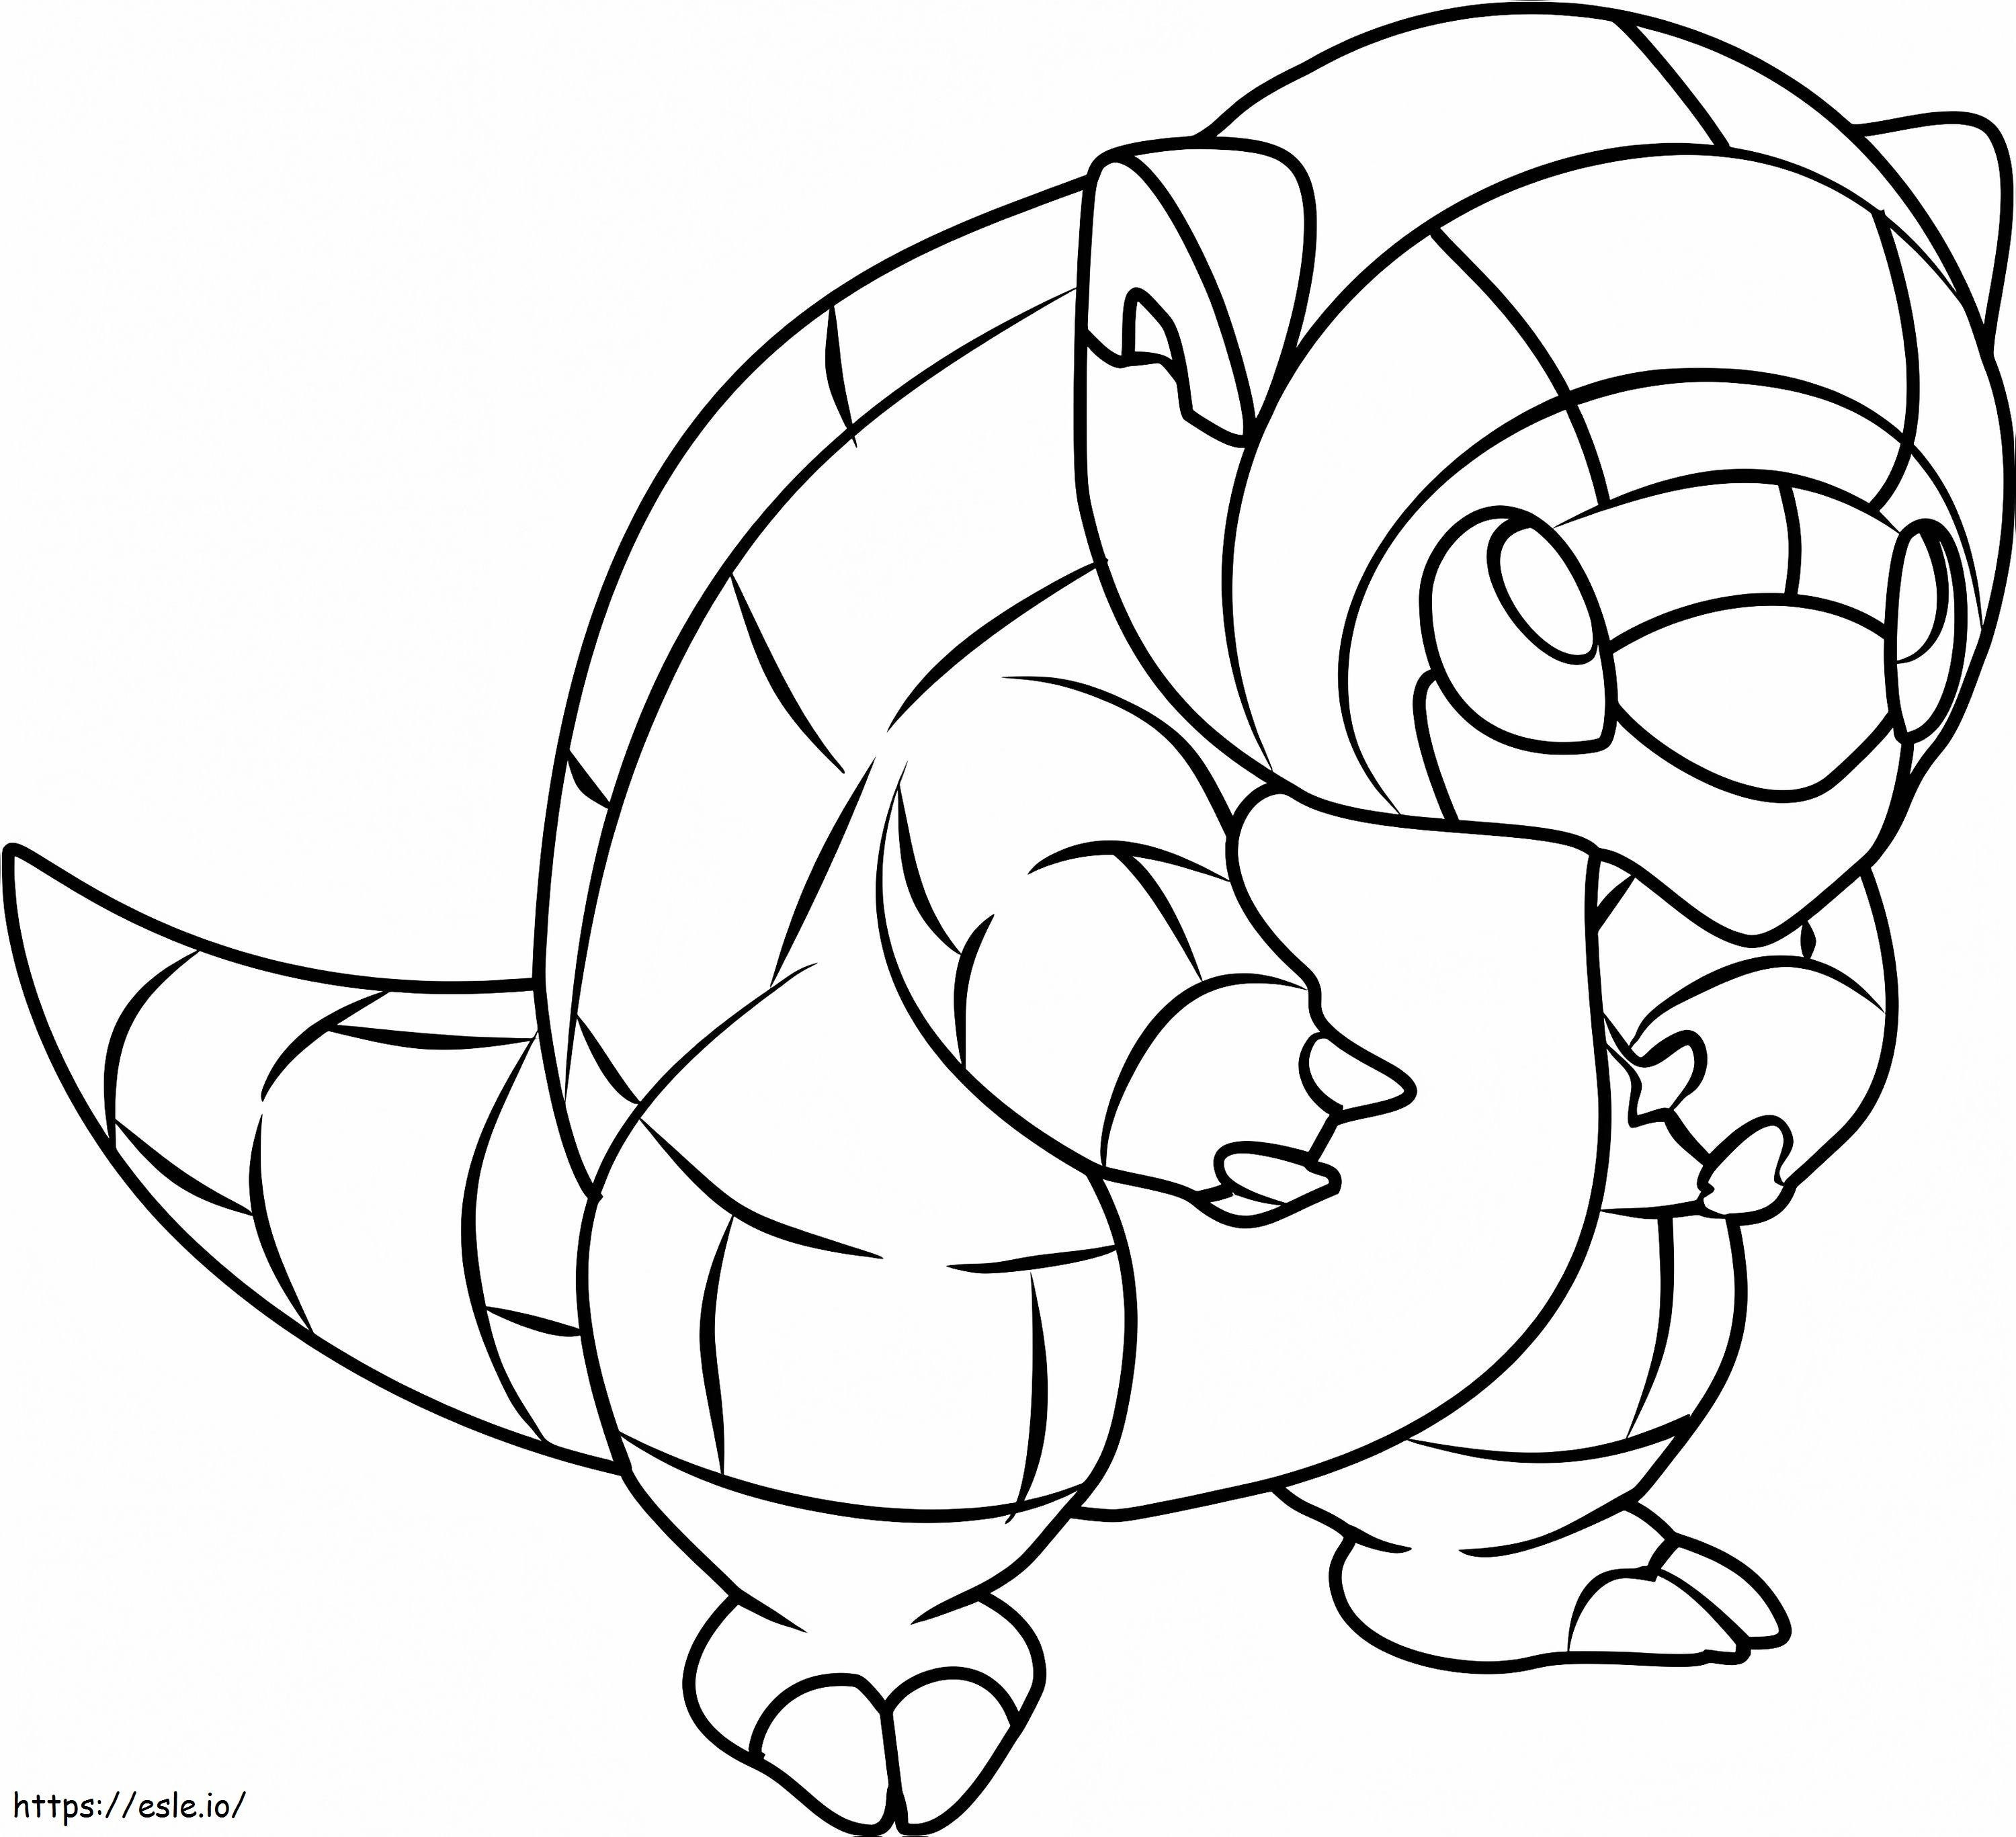 1529608317_18 coloring page